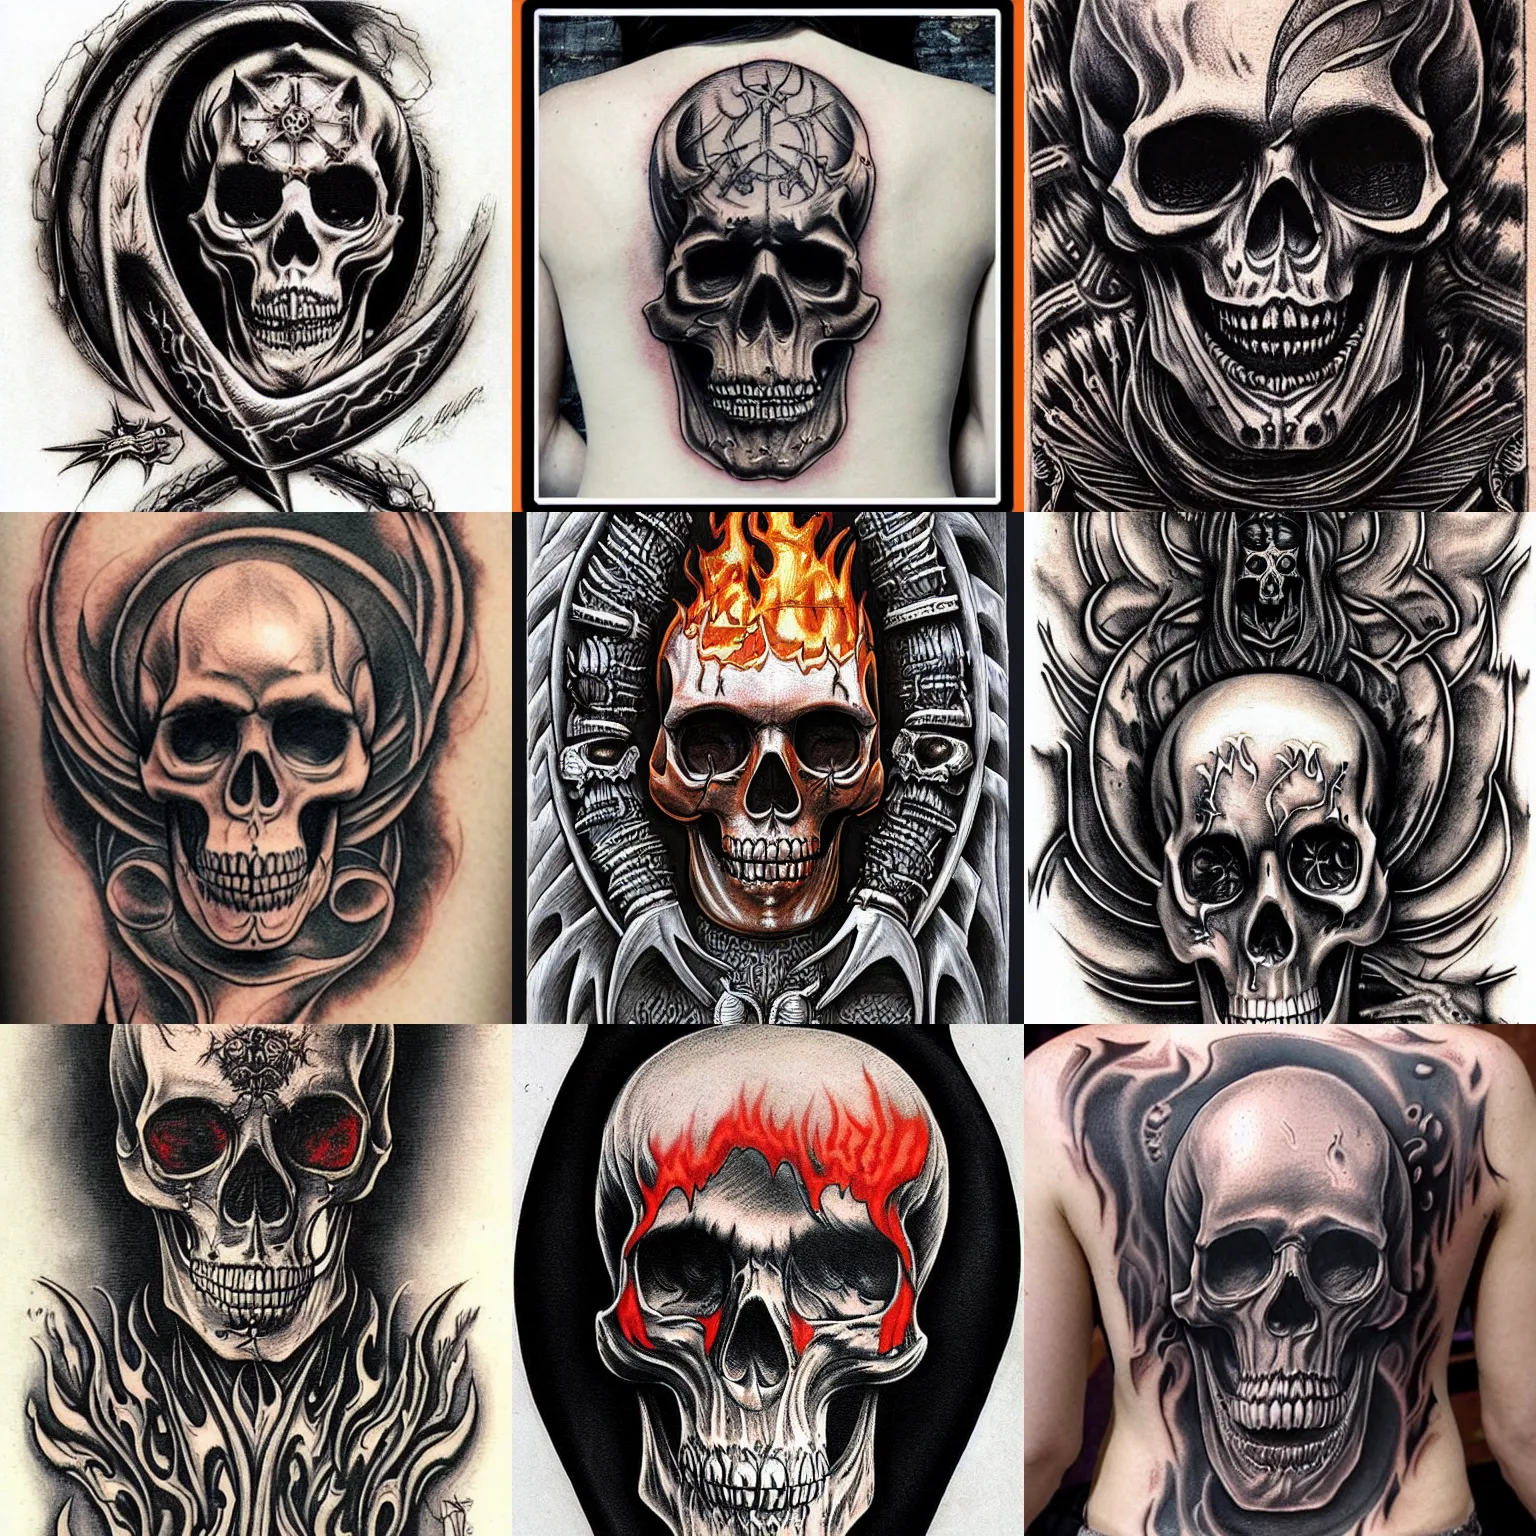 Prompt: a flaming skull tattoo design by H.R. Giger, highly detailed